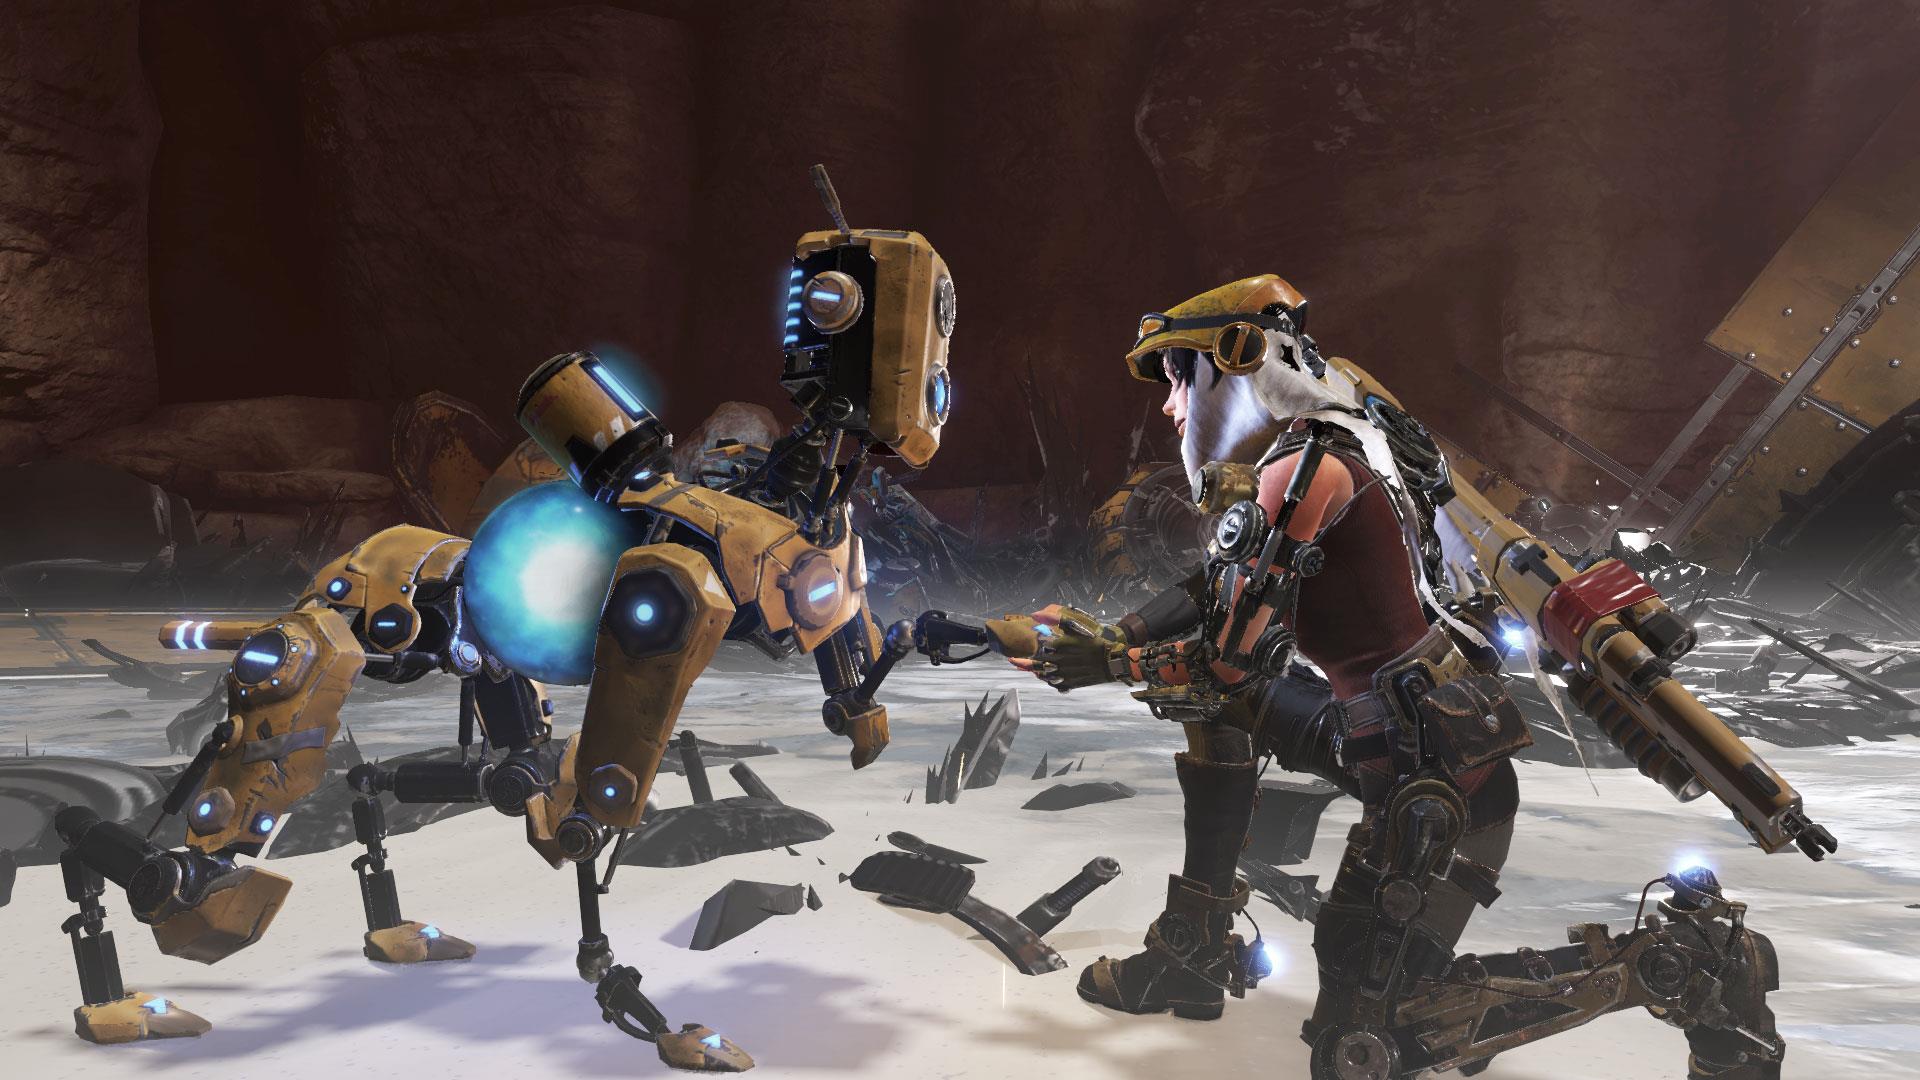 Image for Consider this new ReCore trailer a friendly reminder that September is just around the corner